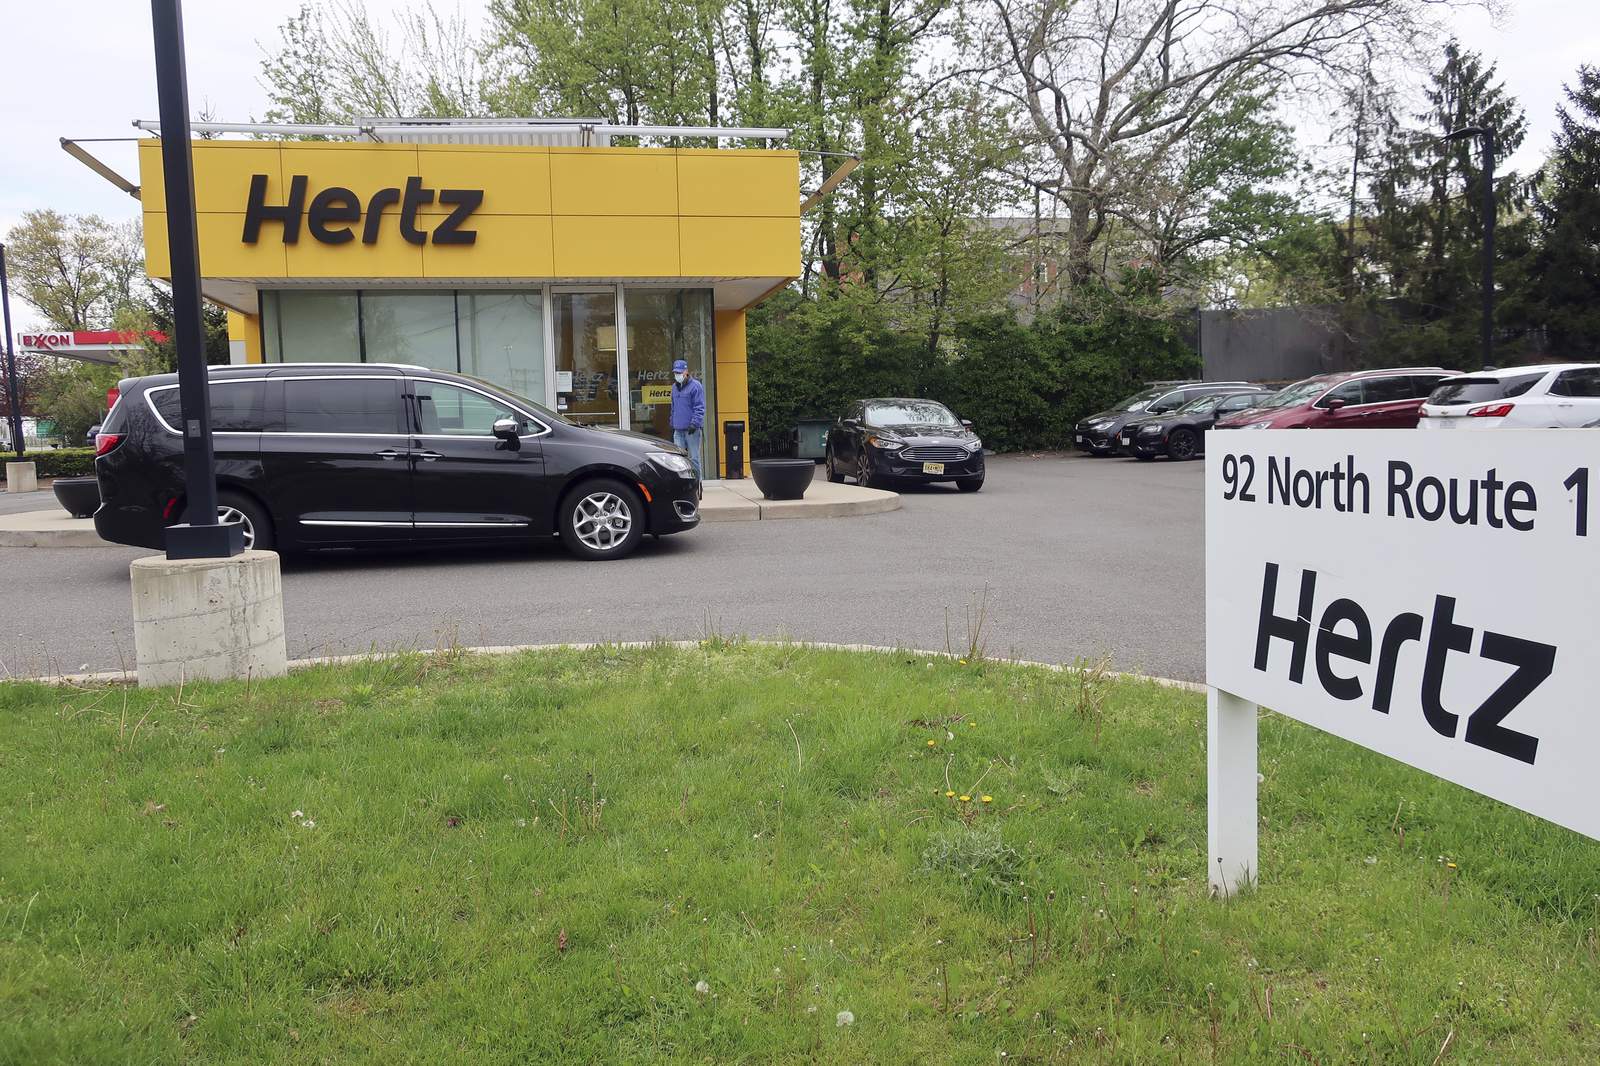 Hertz is selling its cars below market value after bankruptcy announcement